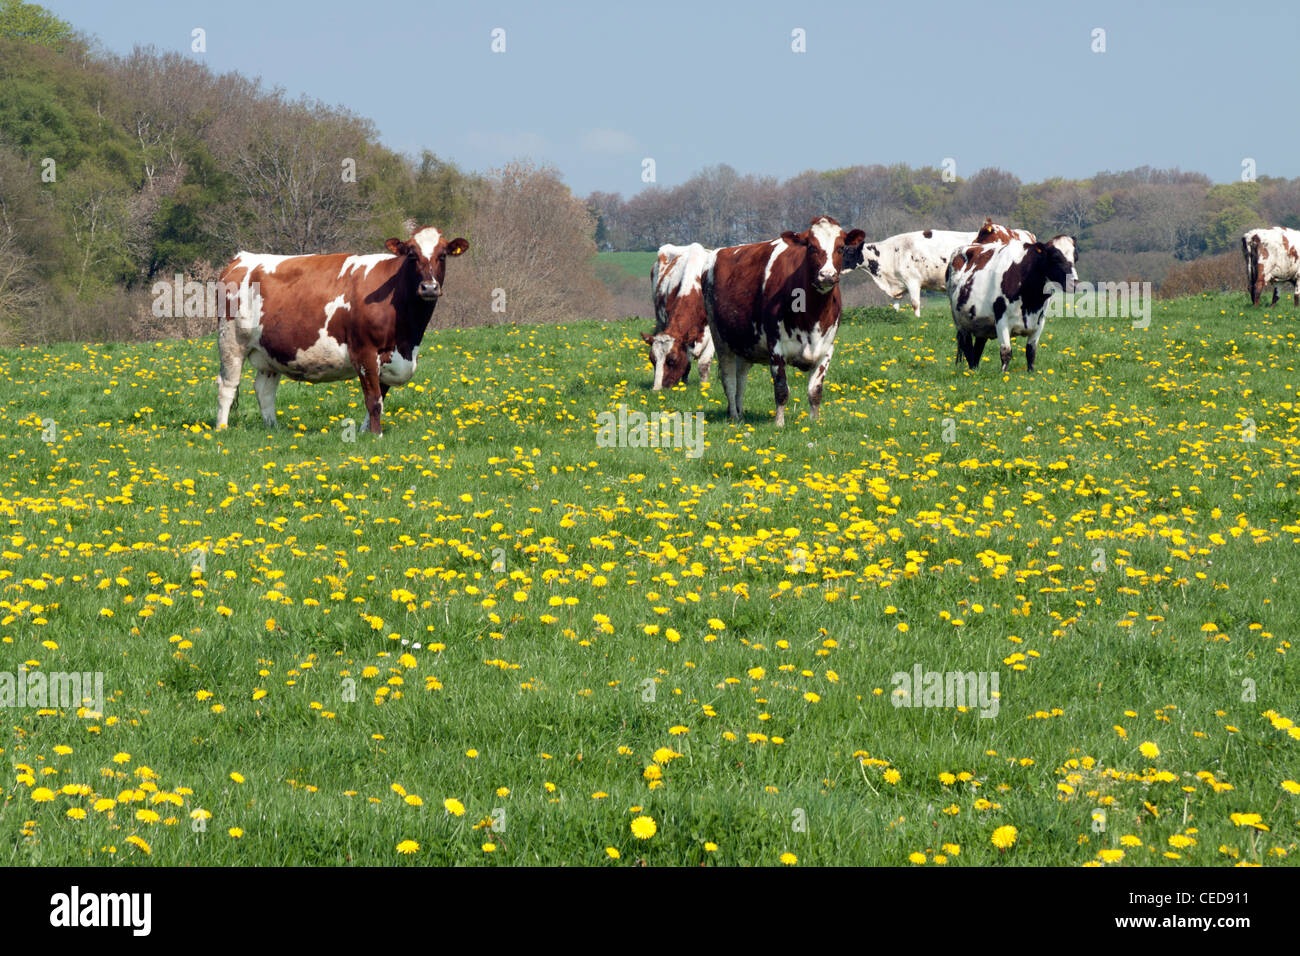 Ayrshire cattle in a meadow filled with dandelions near Fovant in Wiltshire. Stock Photo